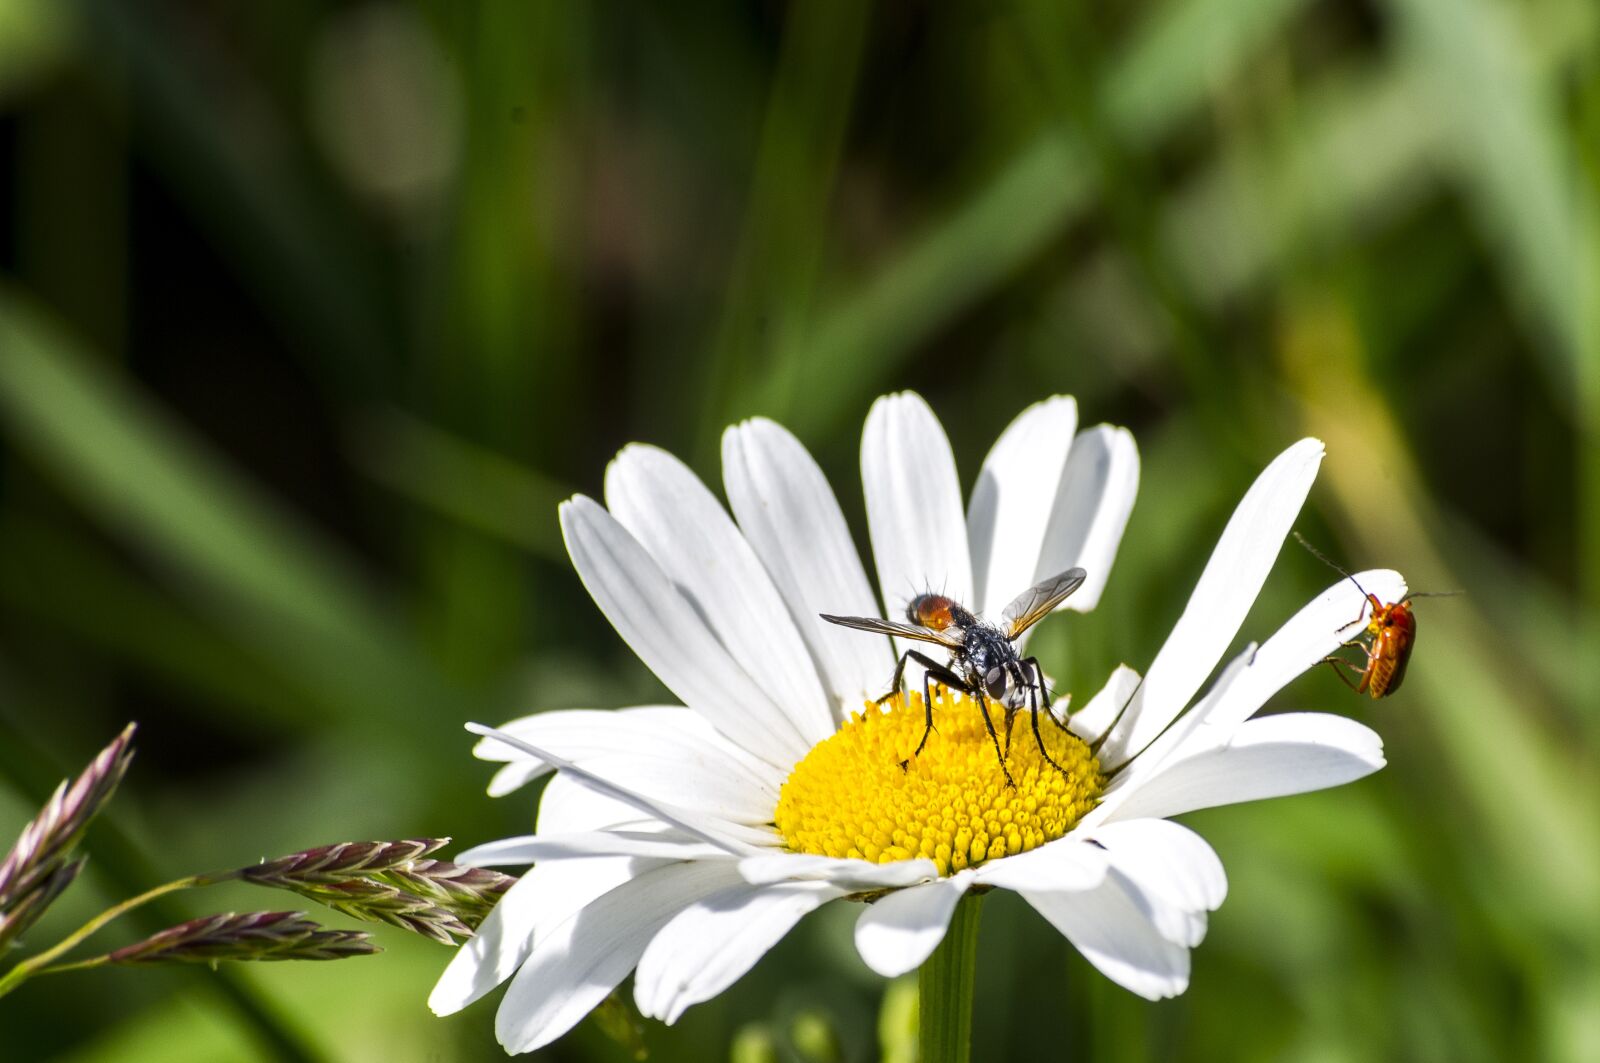 Pentax K-x sample photo. Flower, insect, closeup photography